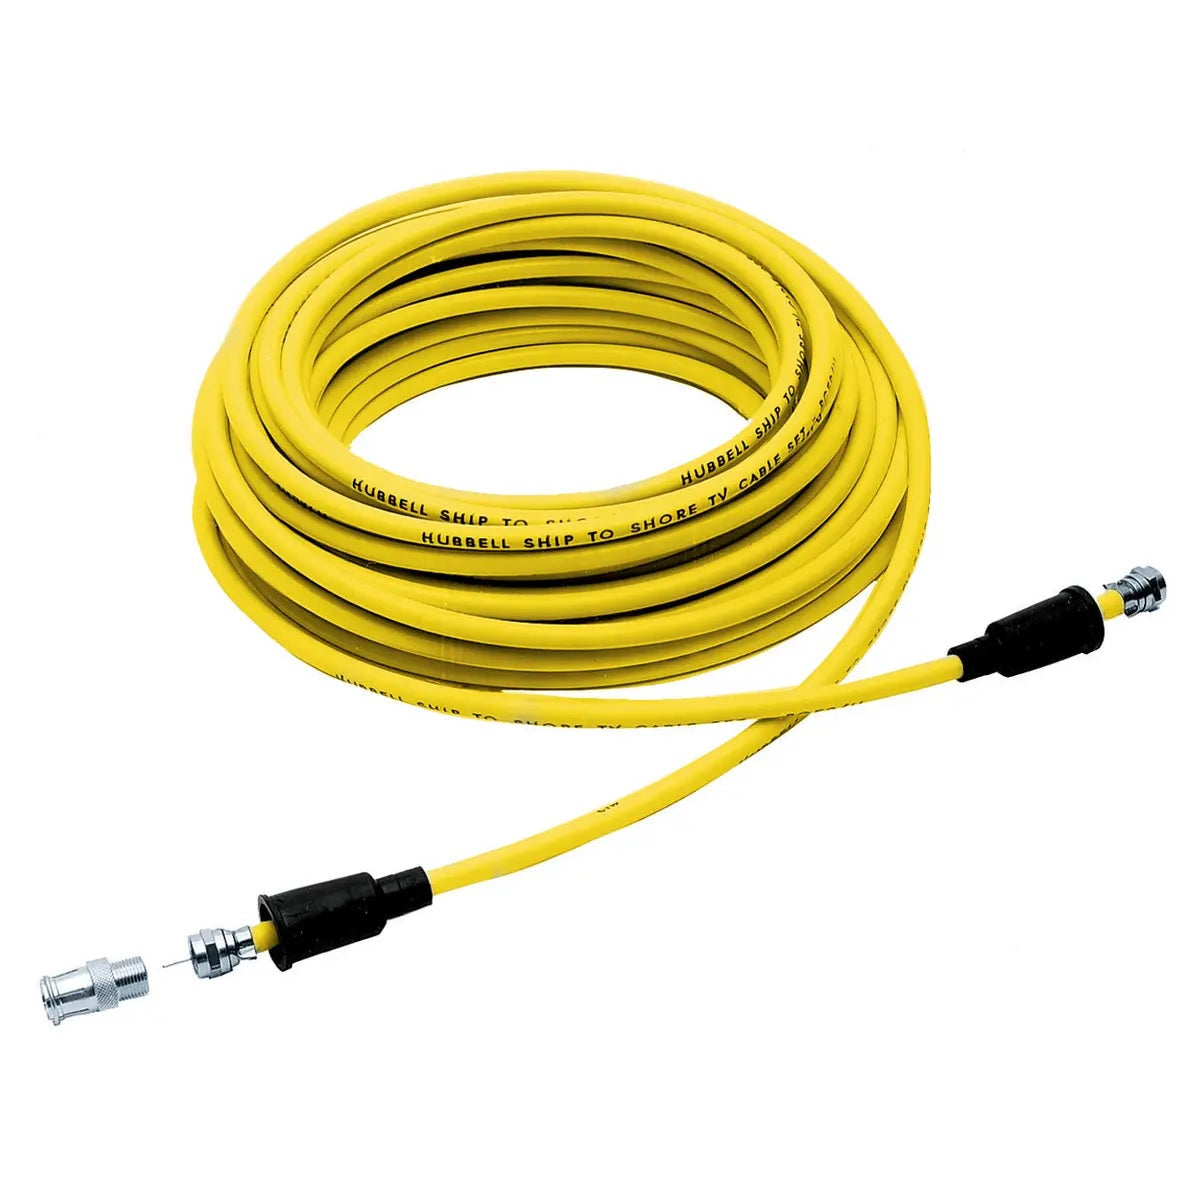 Hubbell HUBTV98 25' TV Cord